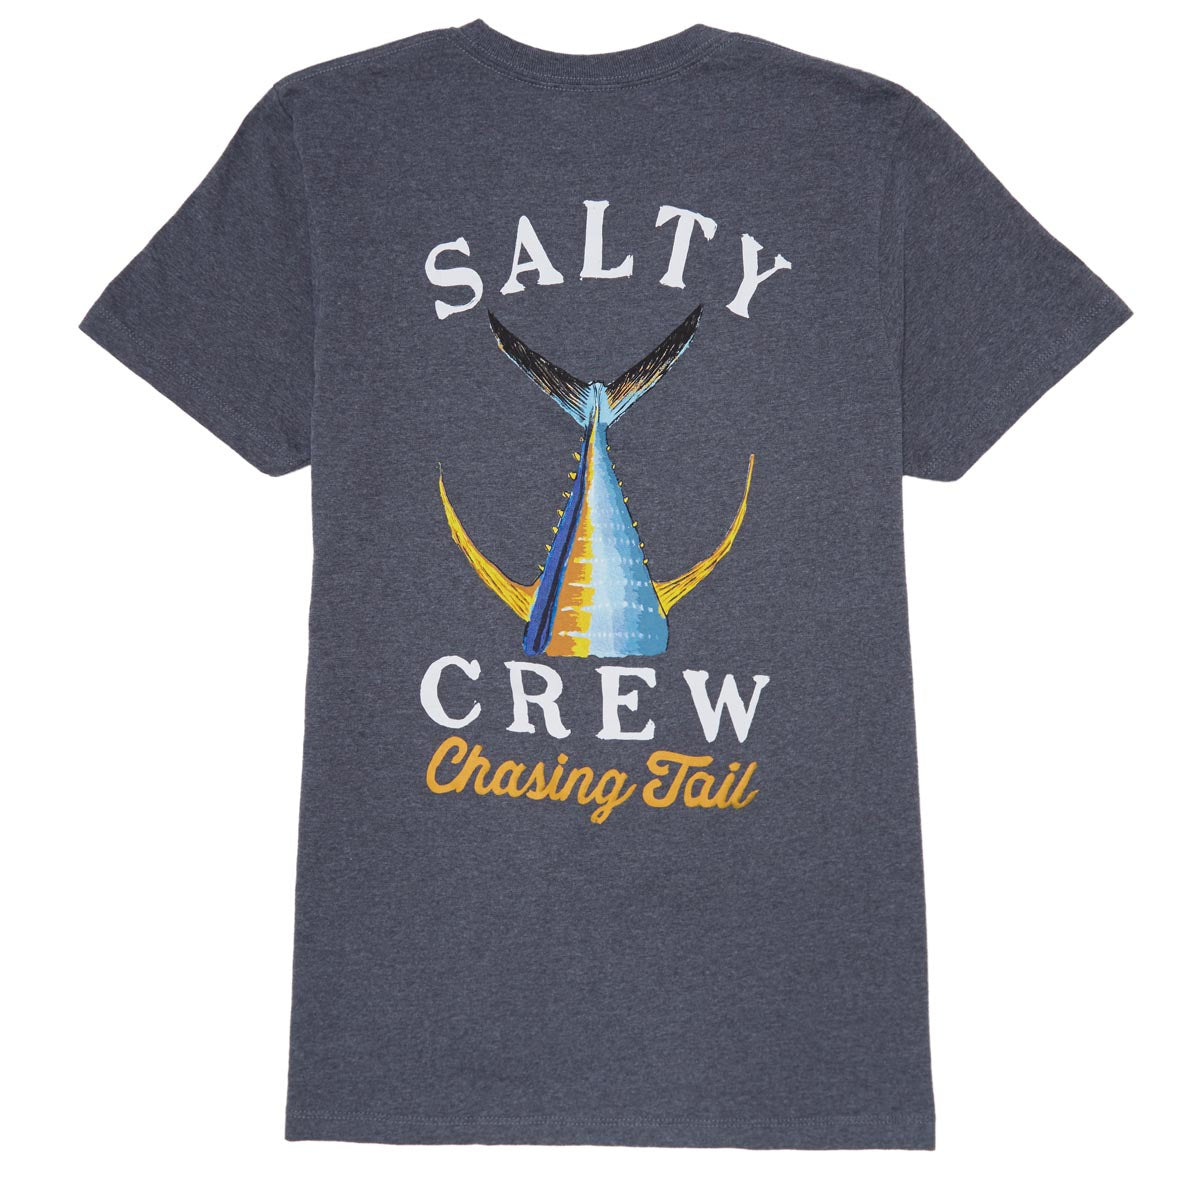 Salty Crew Tailed Classic T-Shirt - Excaliber Heather image 1